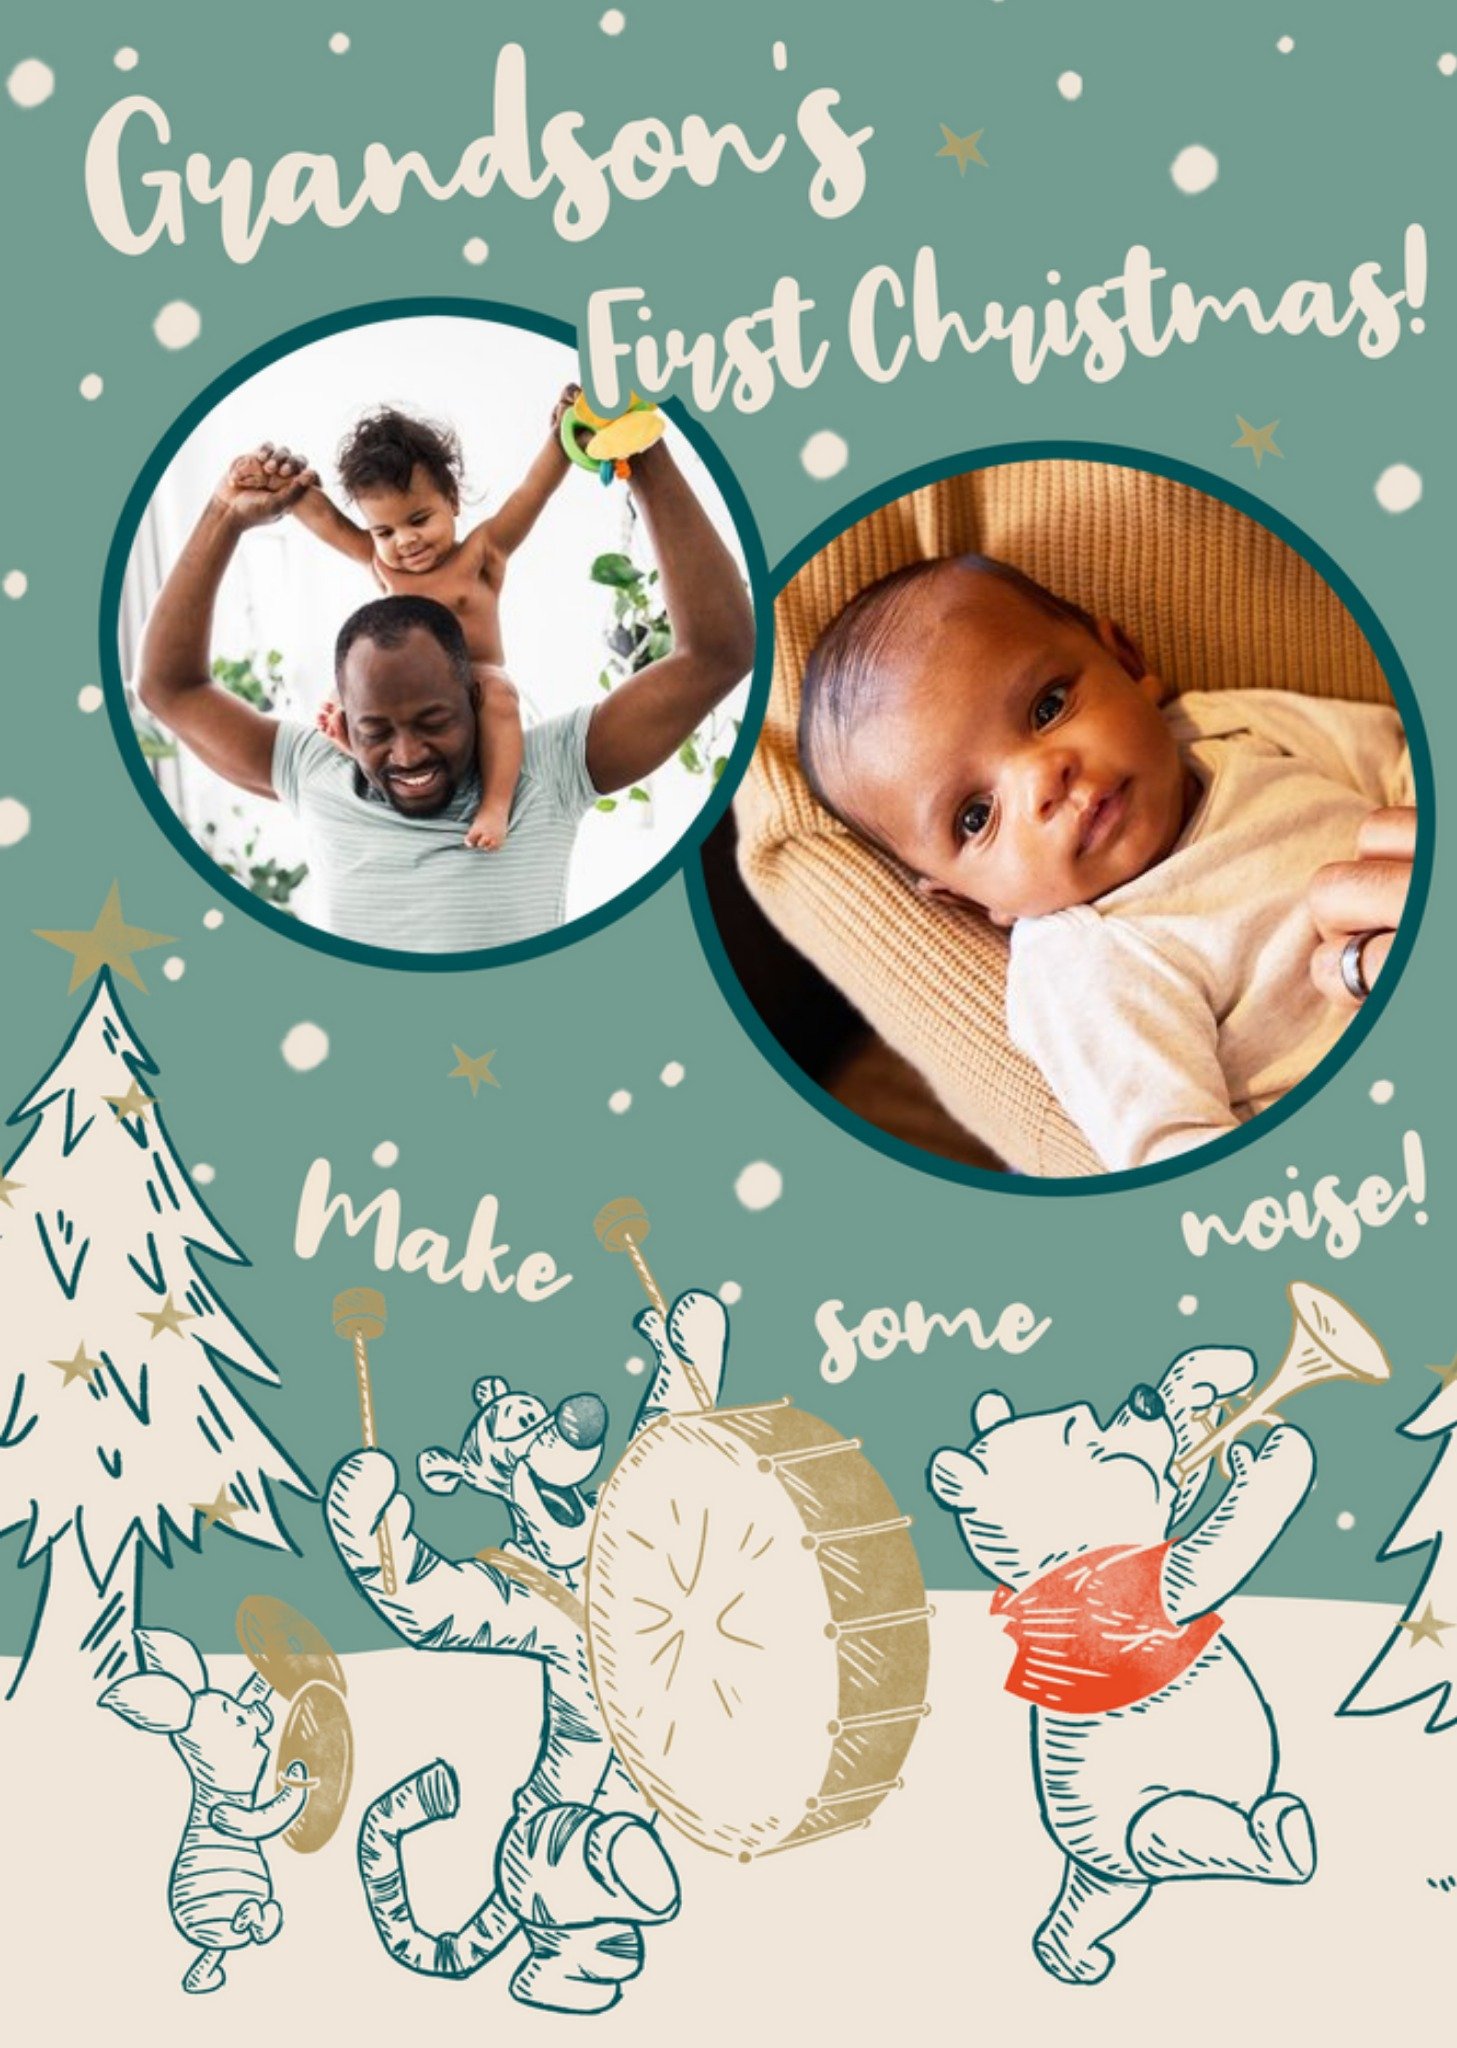 Winnie The Pooh Grandson's First Christmas Photo Upload Card Ecard